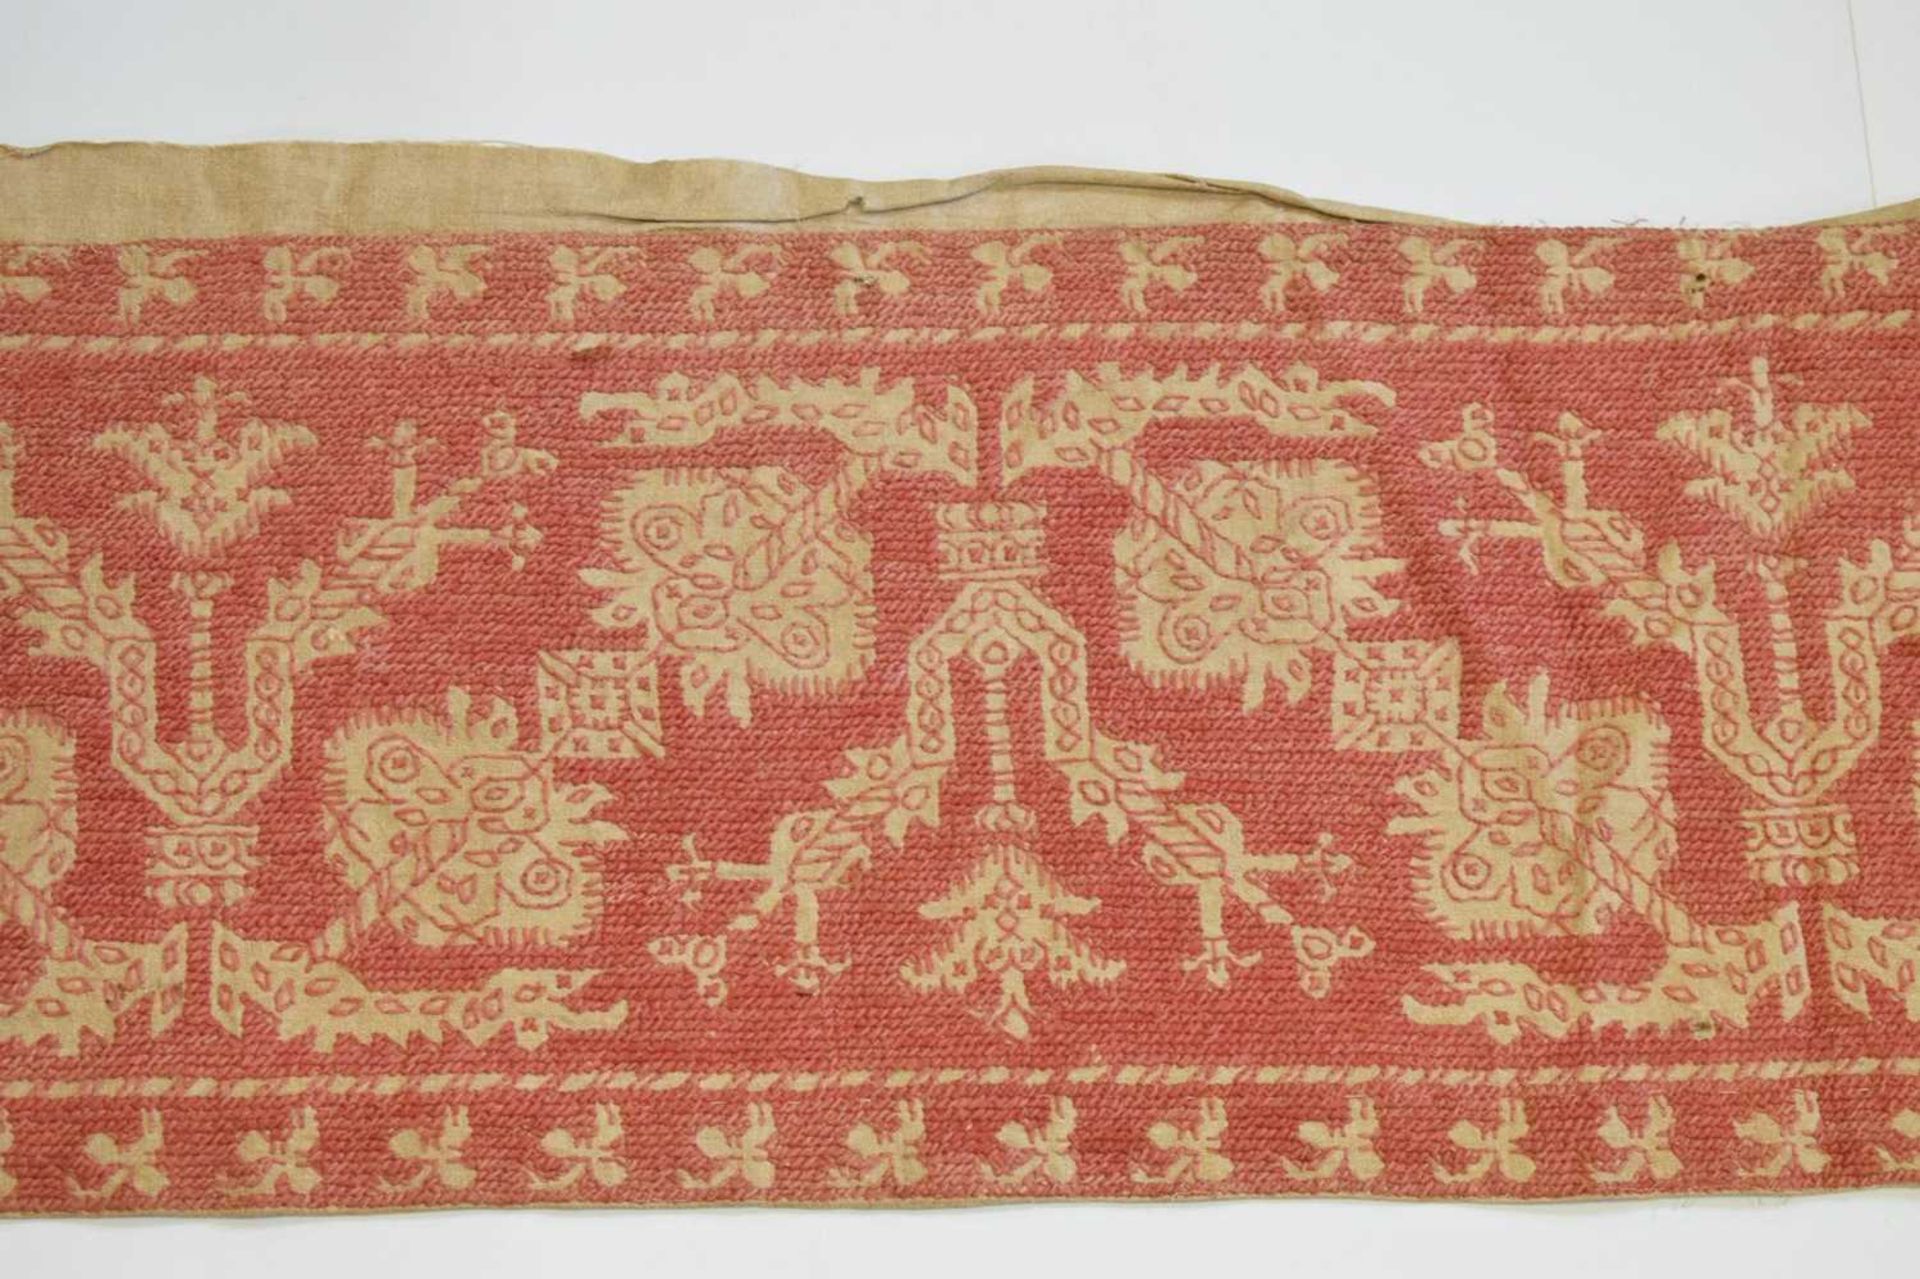 17th Century Italian embroided linen table runner - Image 4 of 8